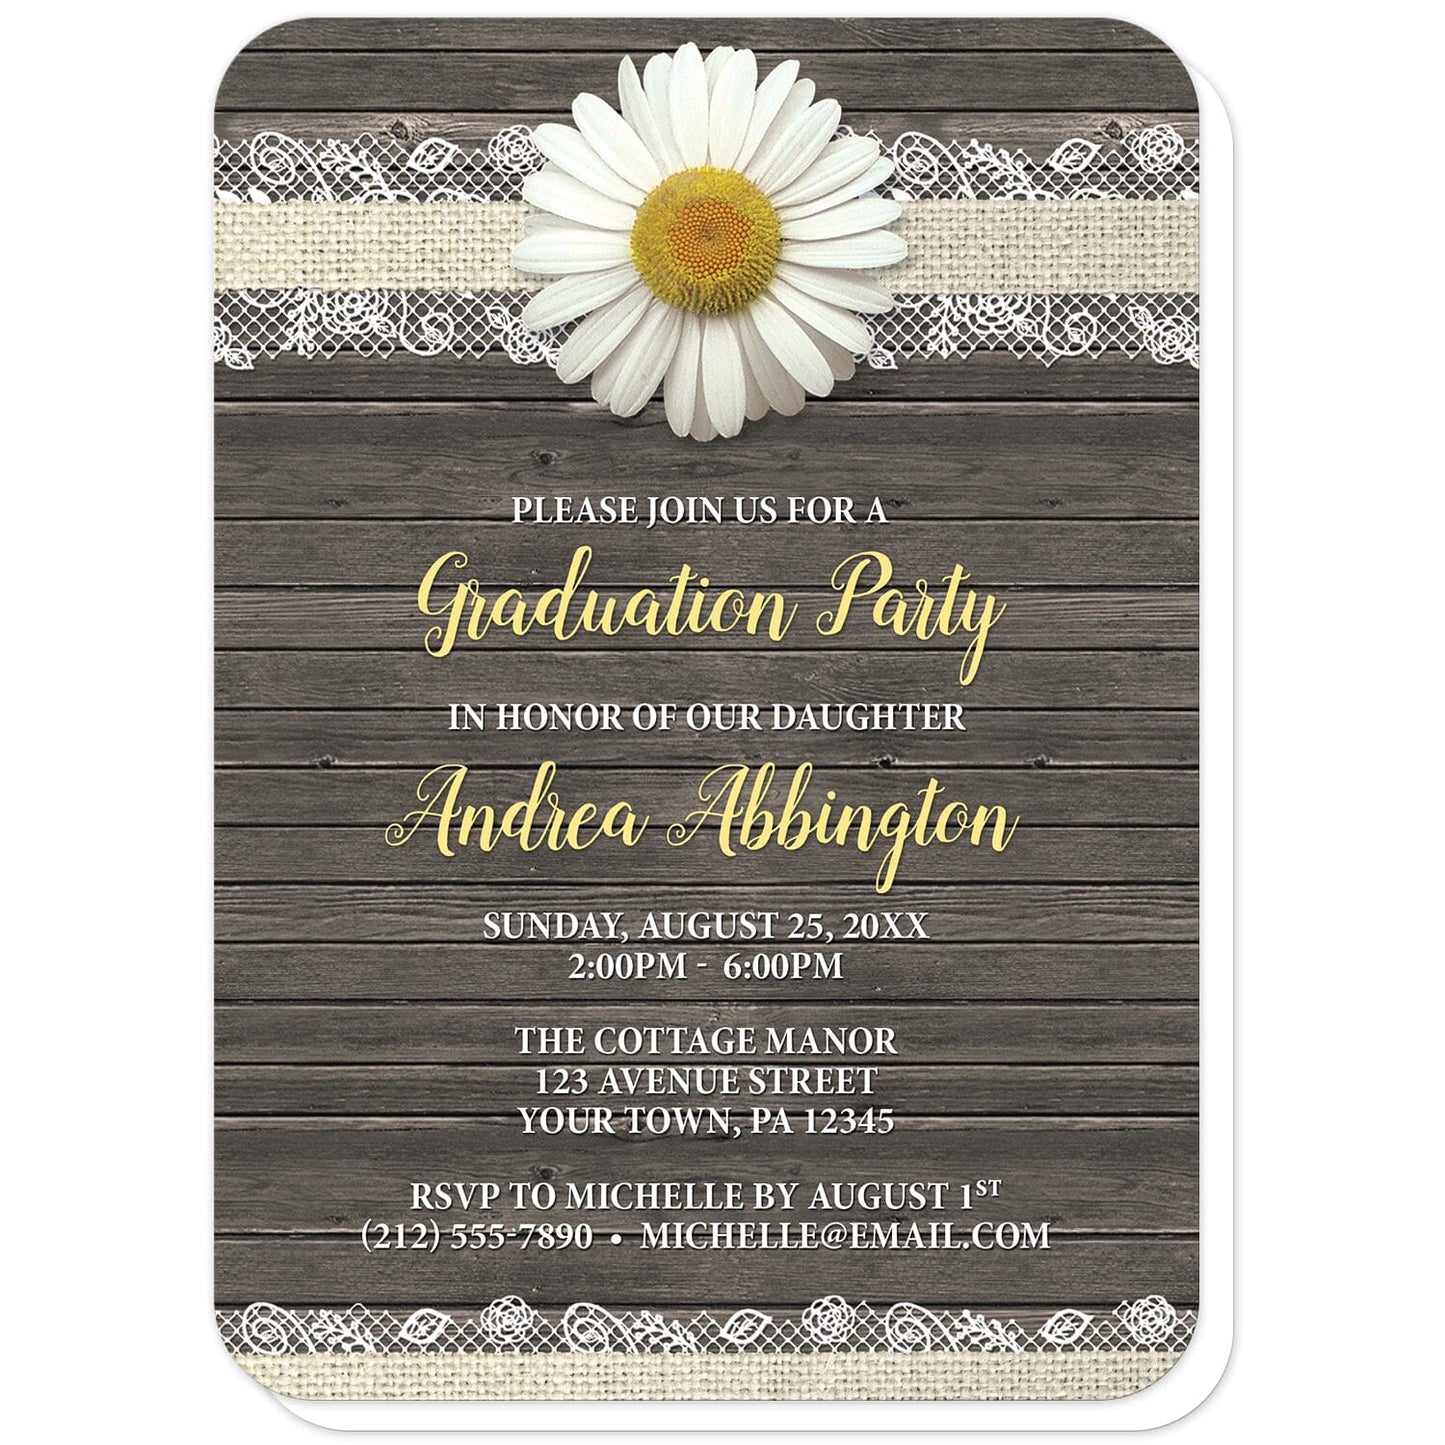 Daisy Burlap and Lace Wood Graduation Invitations (with rounded corners) at Artistically Invited. Southern rustic daisy burlap and lace wood graduation invitations with a white daisy flower image centered at the top on a burlap and lace ribbon strip illustration. Your personalized graduation party details are custom printed in yellow and white over a country brown wood background. 